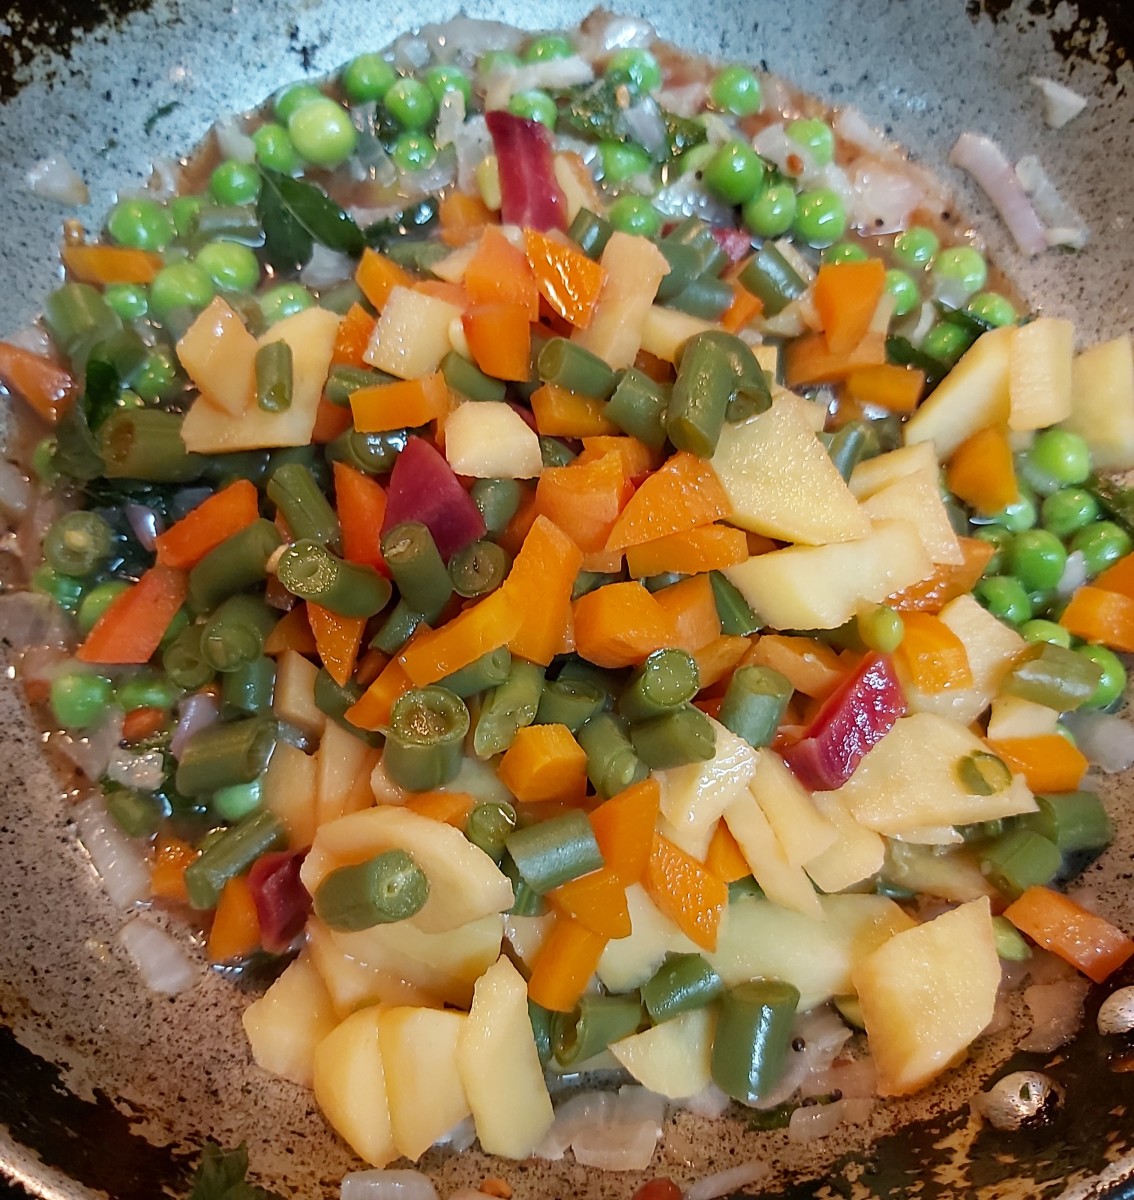 Add cooked vegetables to a pan, mix and cook for 1-2 minutes (don't discard the water). 